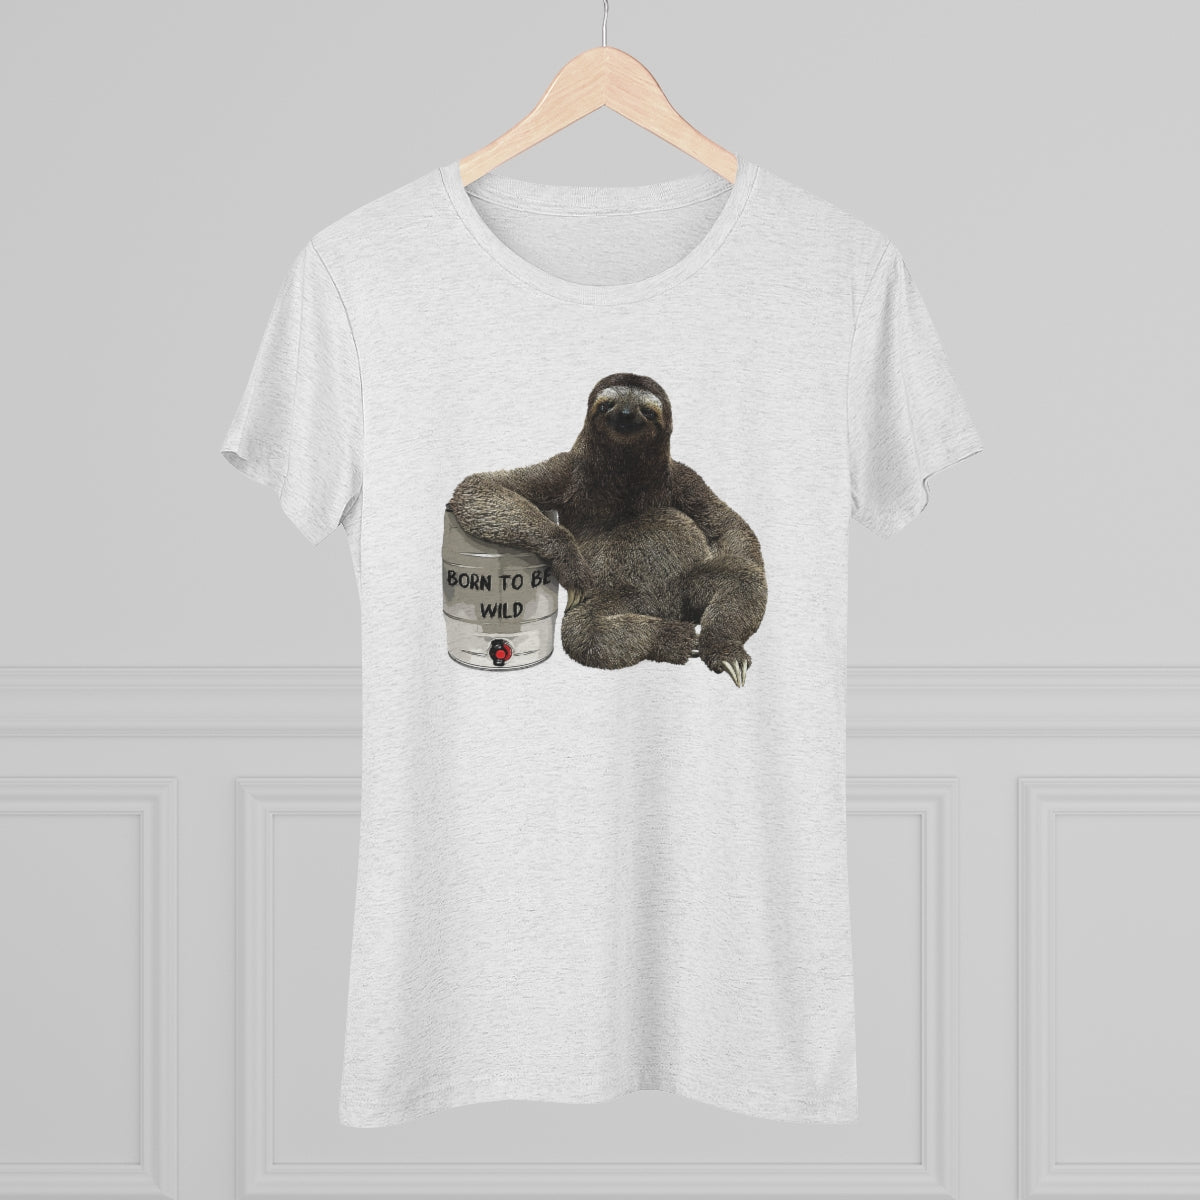 Born to be wild- Party Sloth with beer keg- WomenBrainStorm Tees